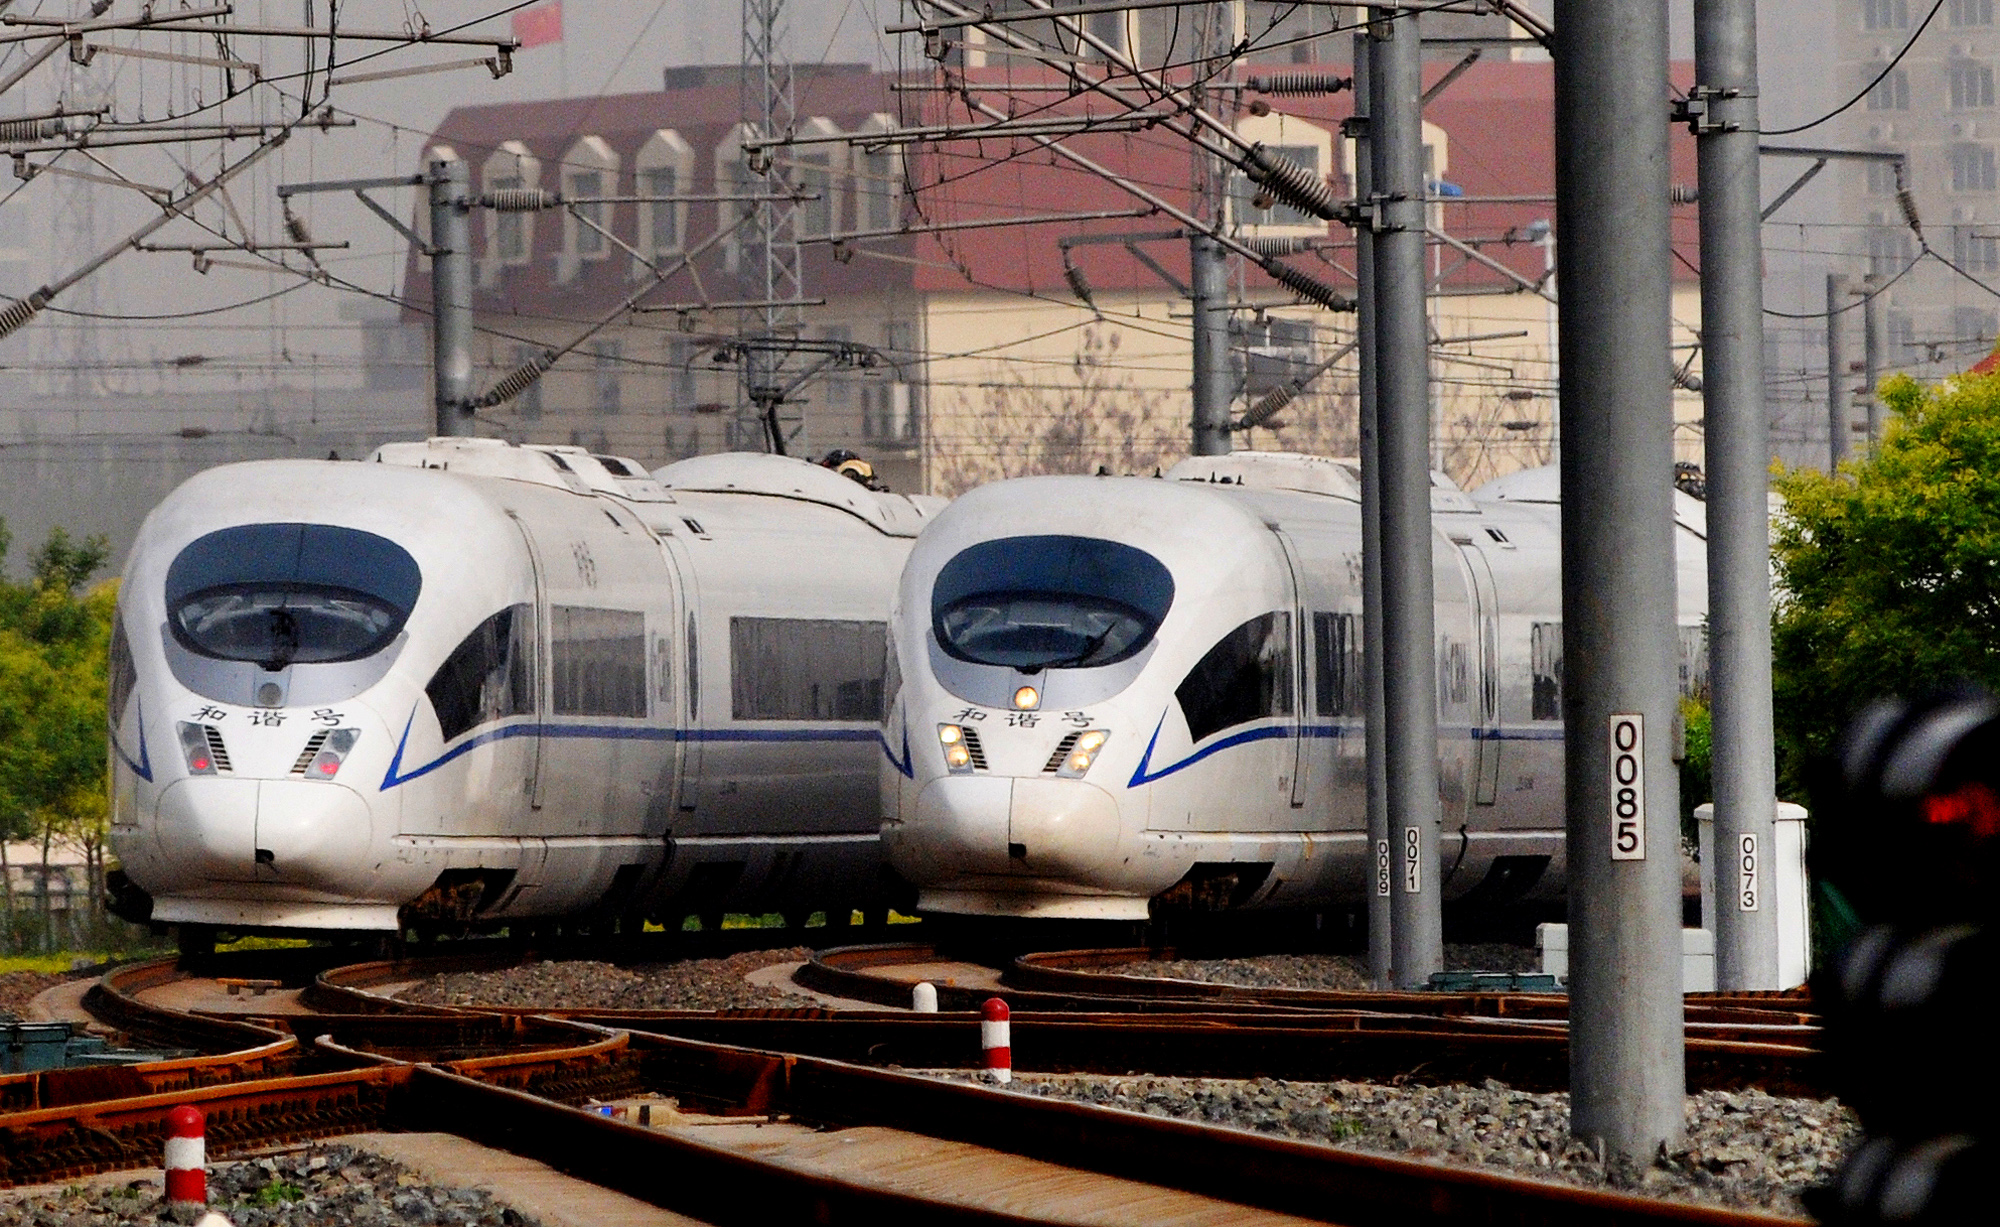 Photo taken on April 29, 2012 shows two CRH high-speed intercity trains, which travel between Beijing and Tianjin, at Tianjin Railway Station in north China's Tianjin Municipality. Photo: Xinhua